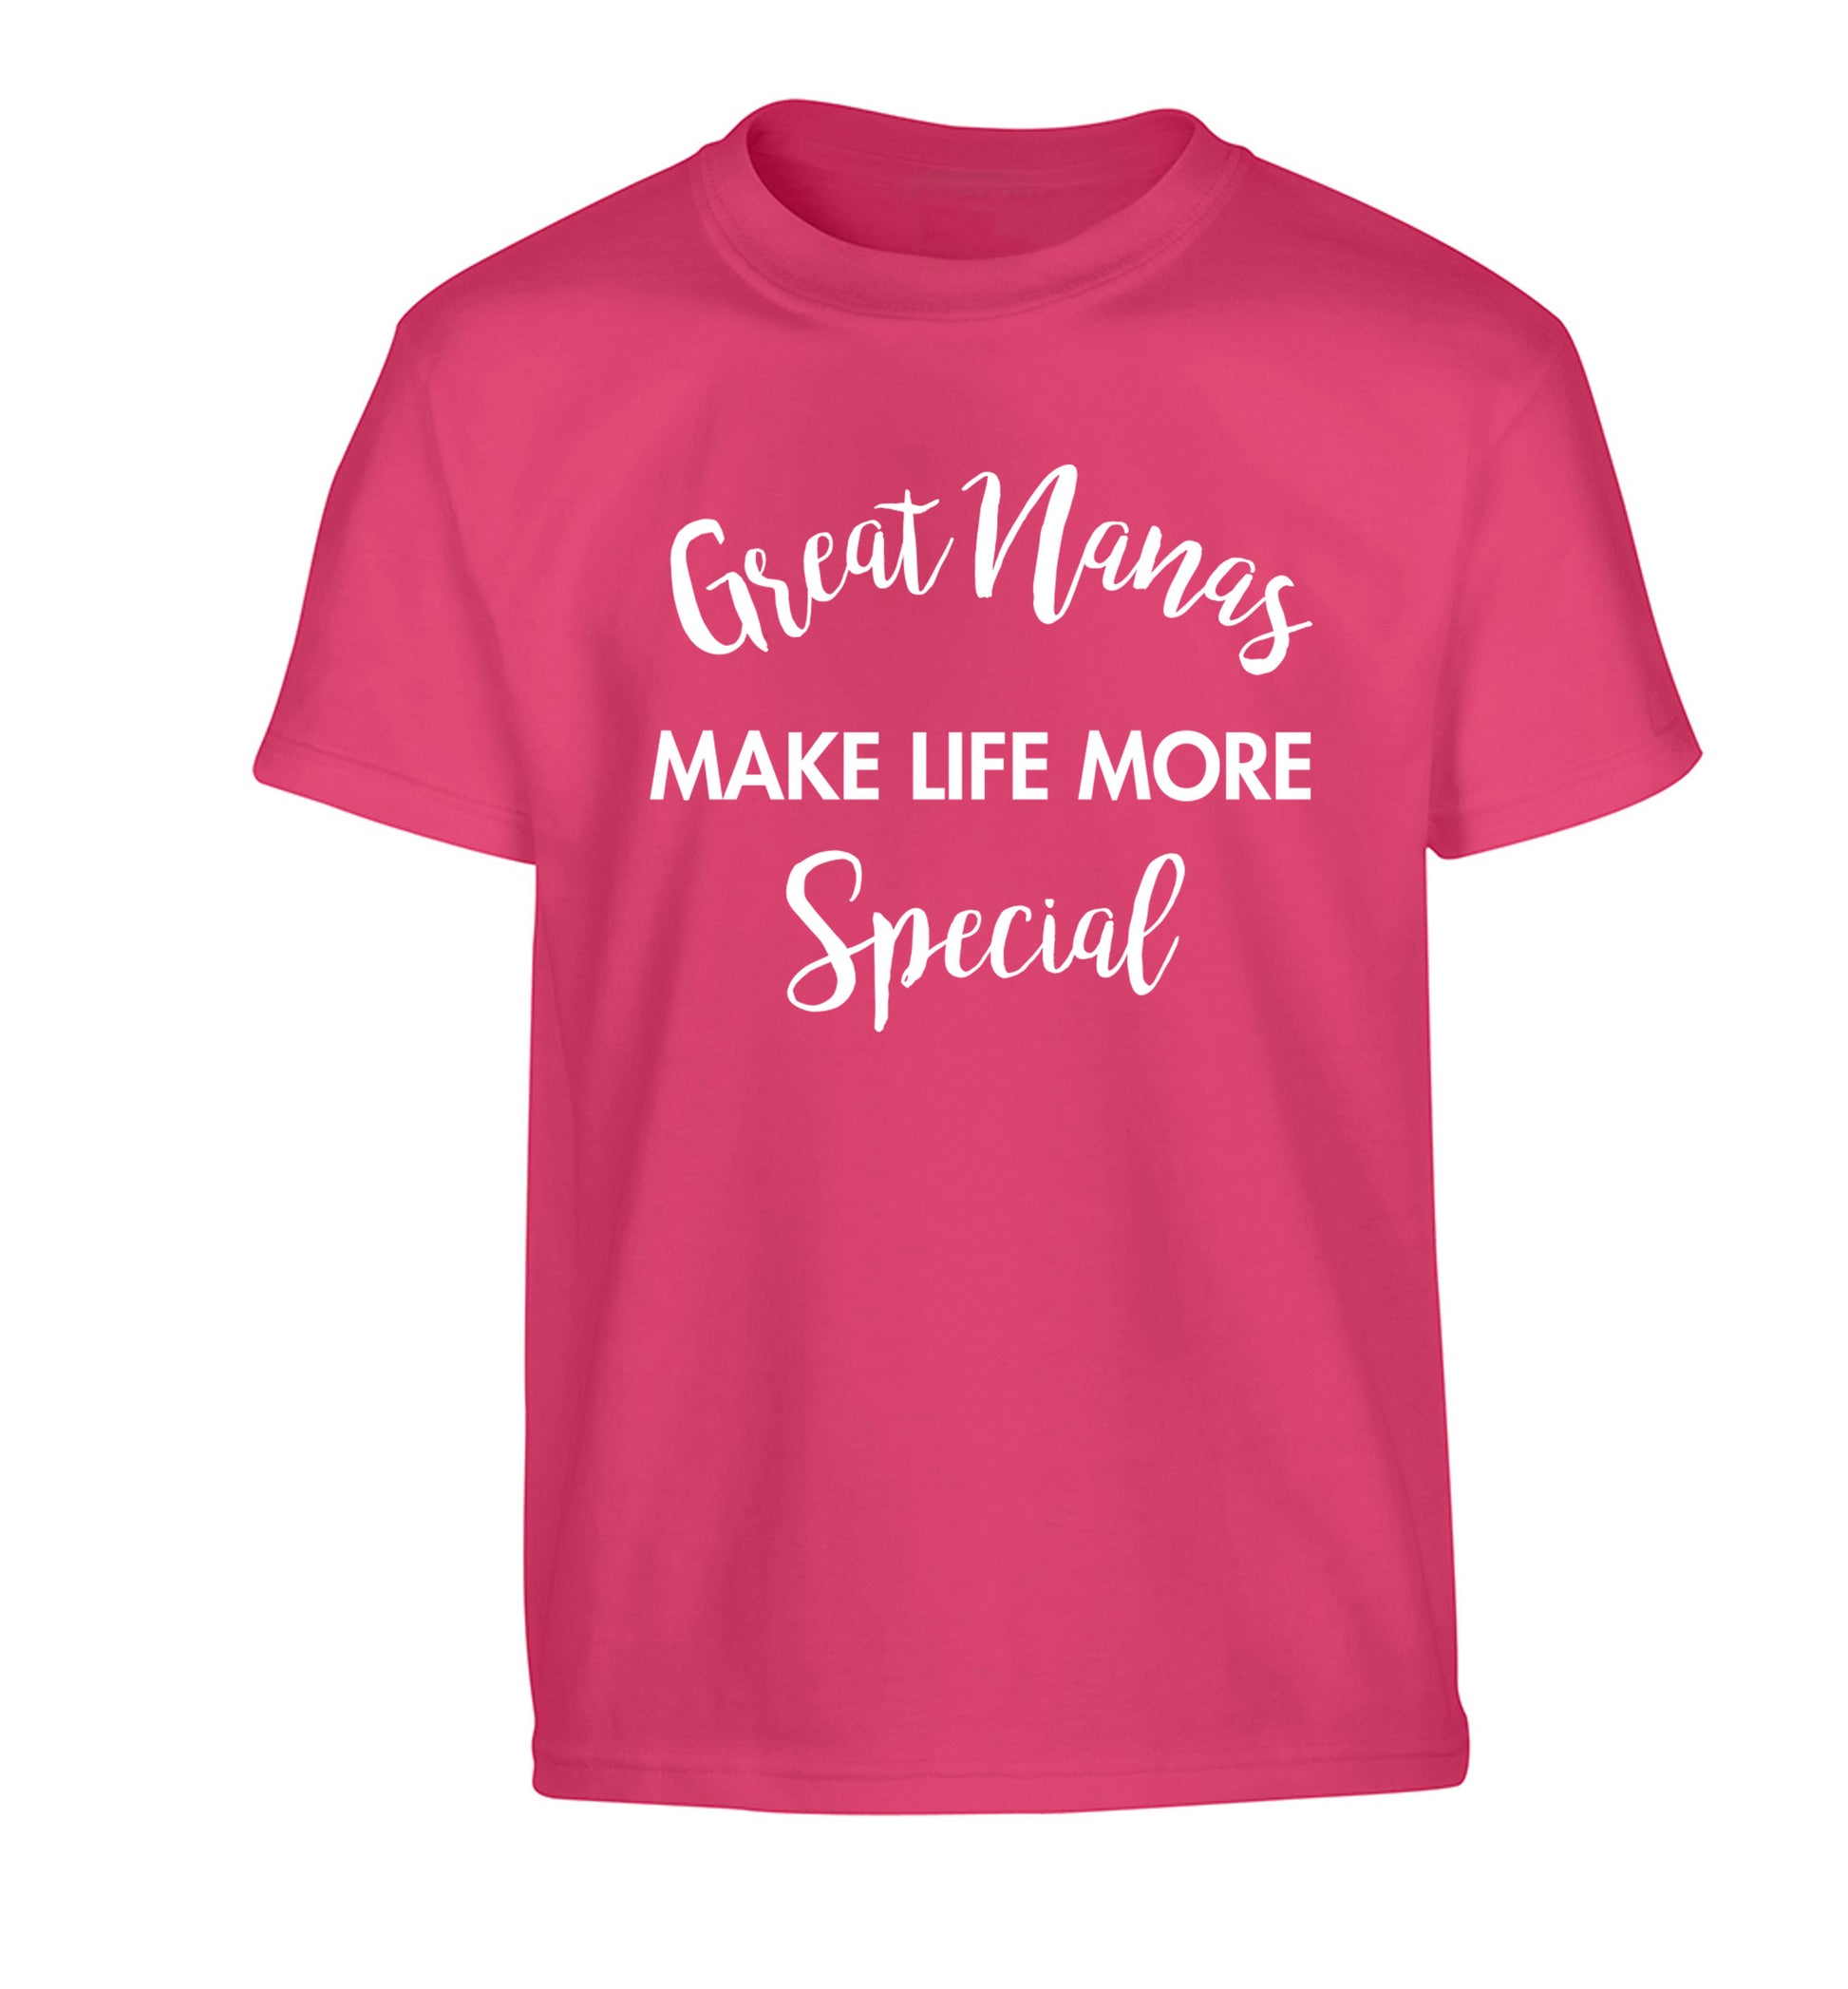 Great nanas make life more special Children's pink Tshirt 12-14 Years